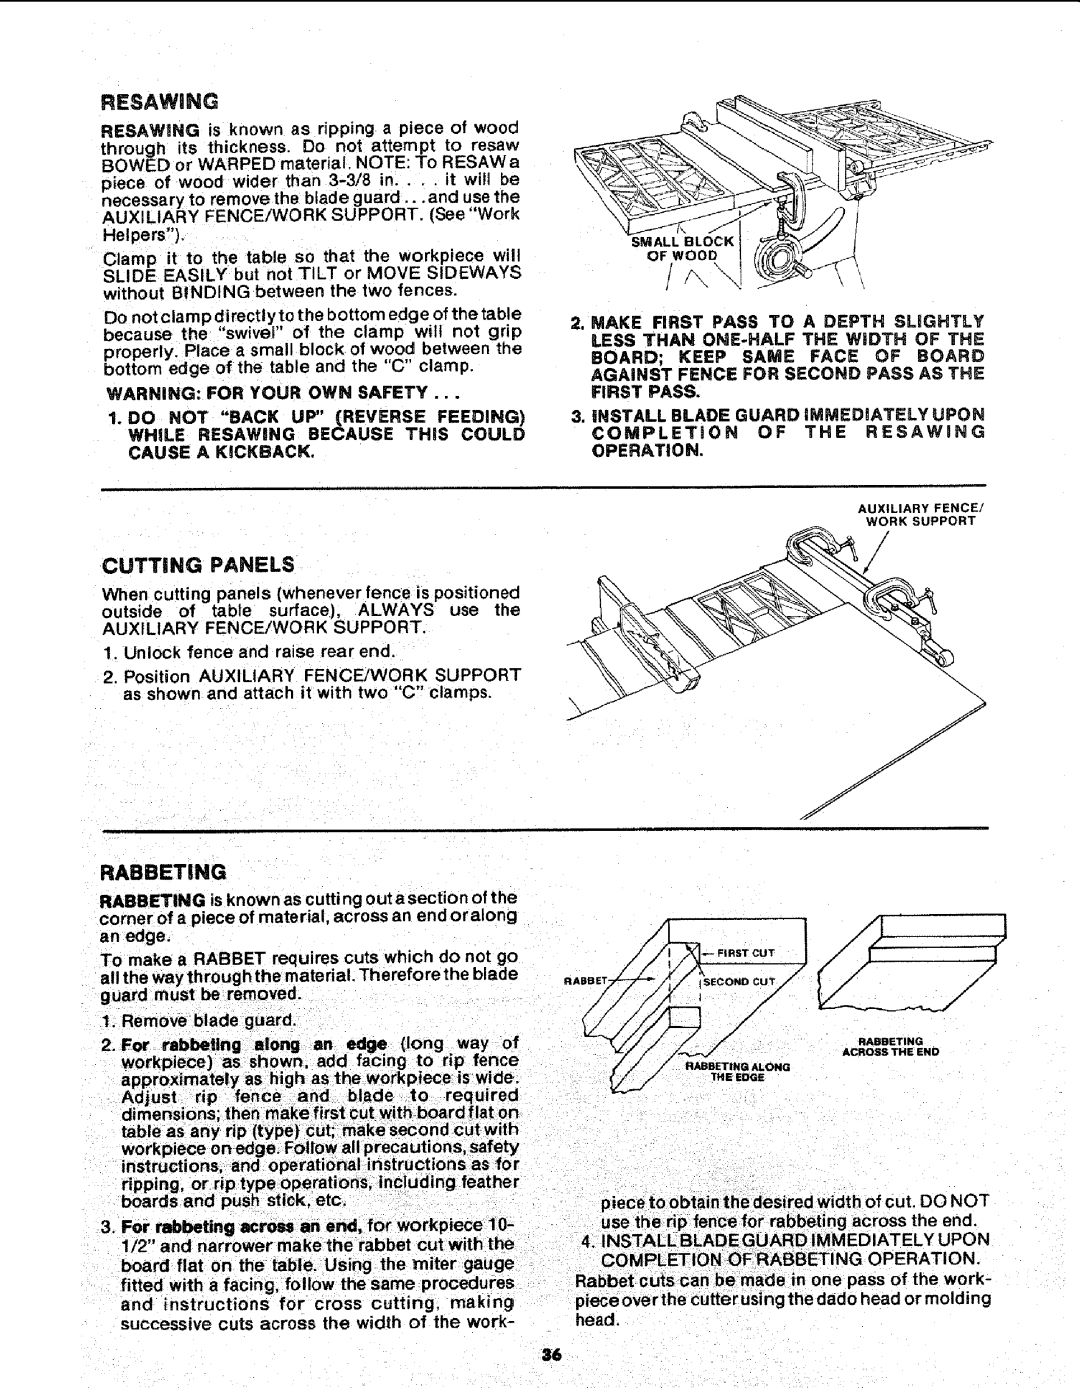 Sears 113.241591 owner manual Resawing, Cutting Panels, Rabbeting, S 00D F 